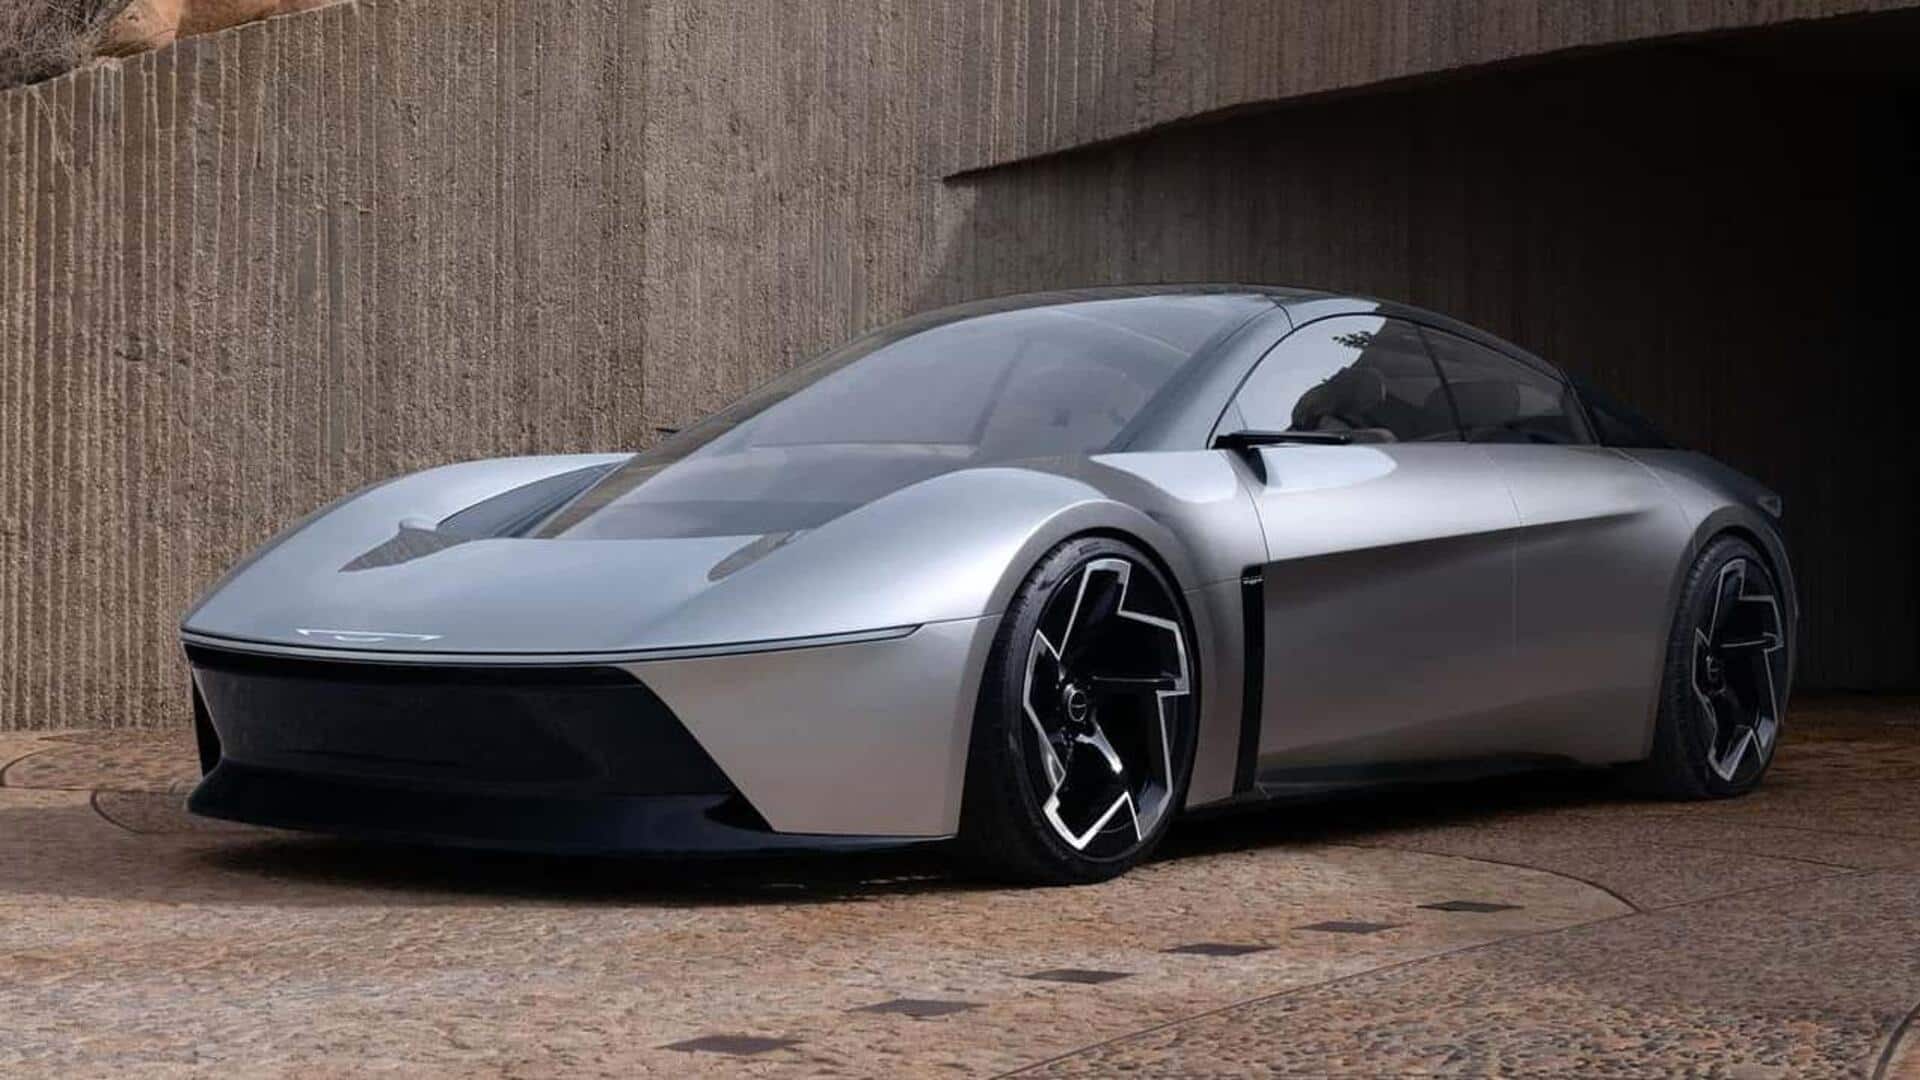 Chrysler's Halcyon EV concept greets and plays songs to drivers